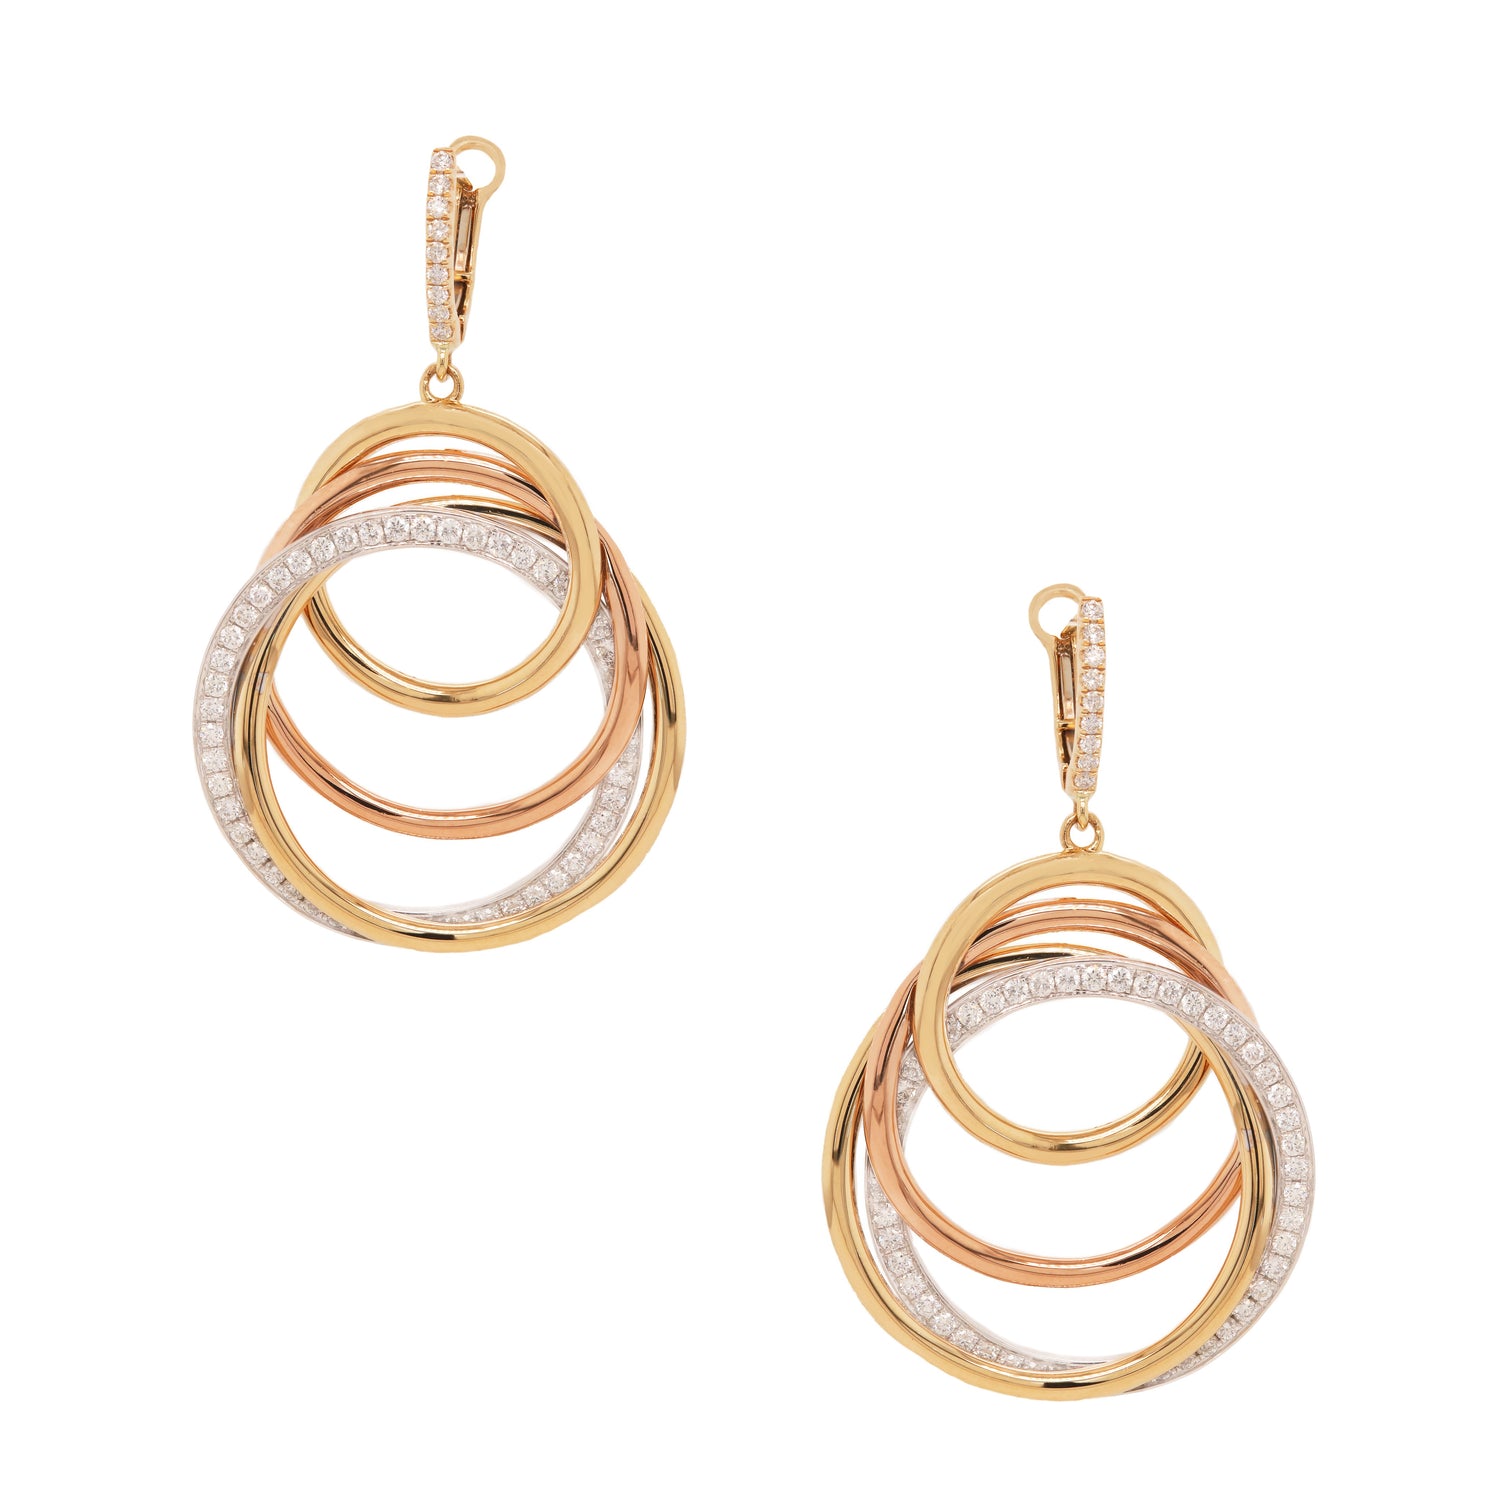 Three-toned gold drop earrings with interlocking circles adorned with diamonds